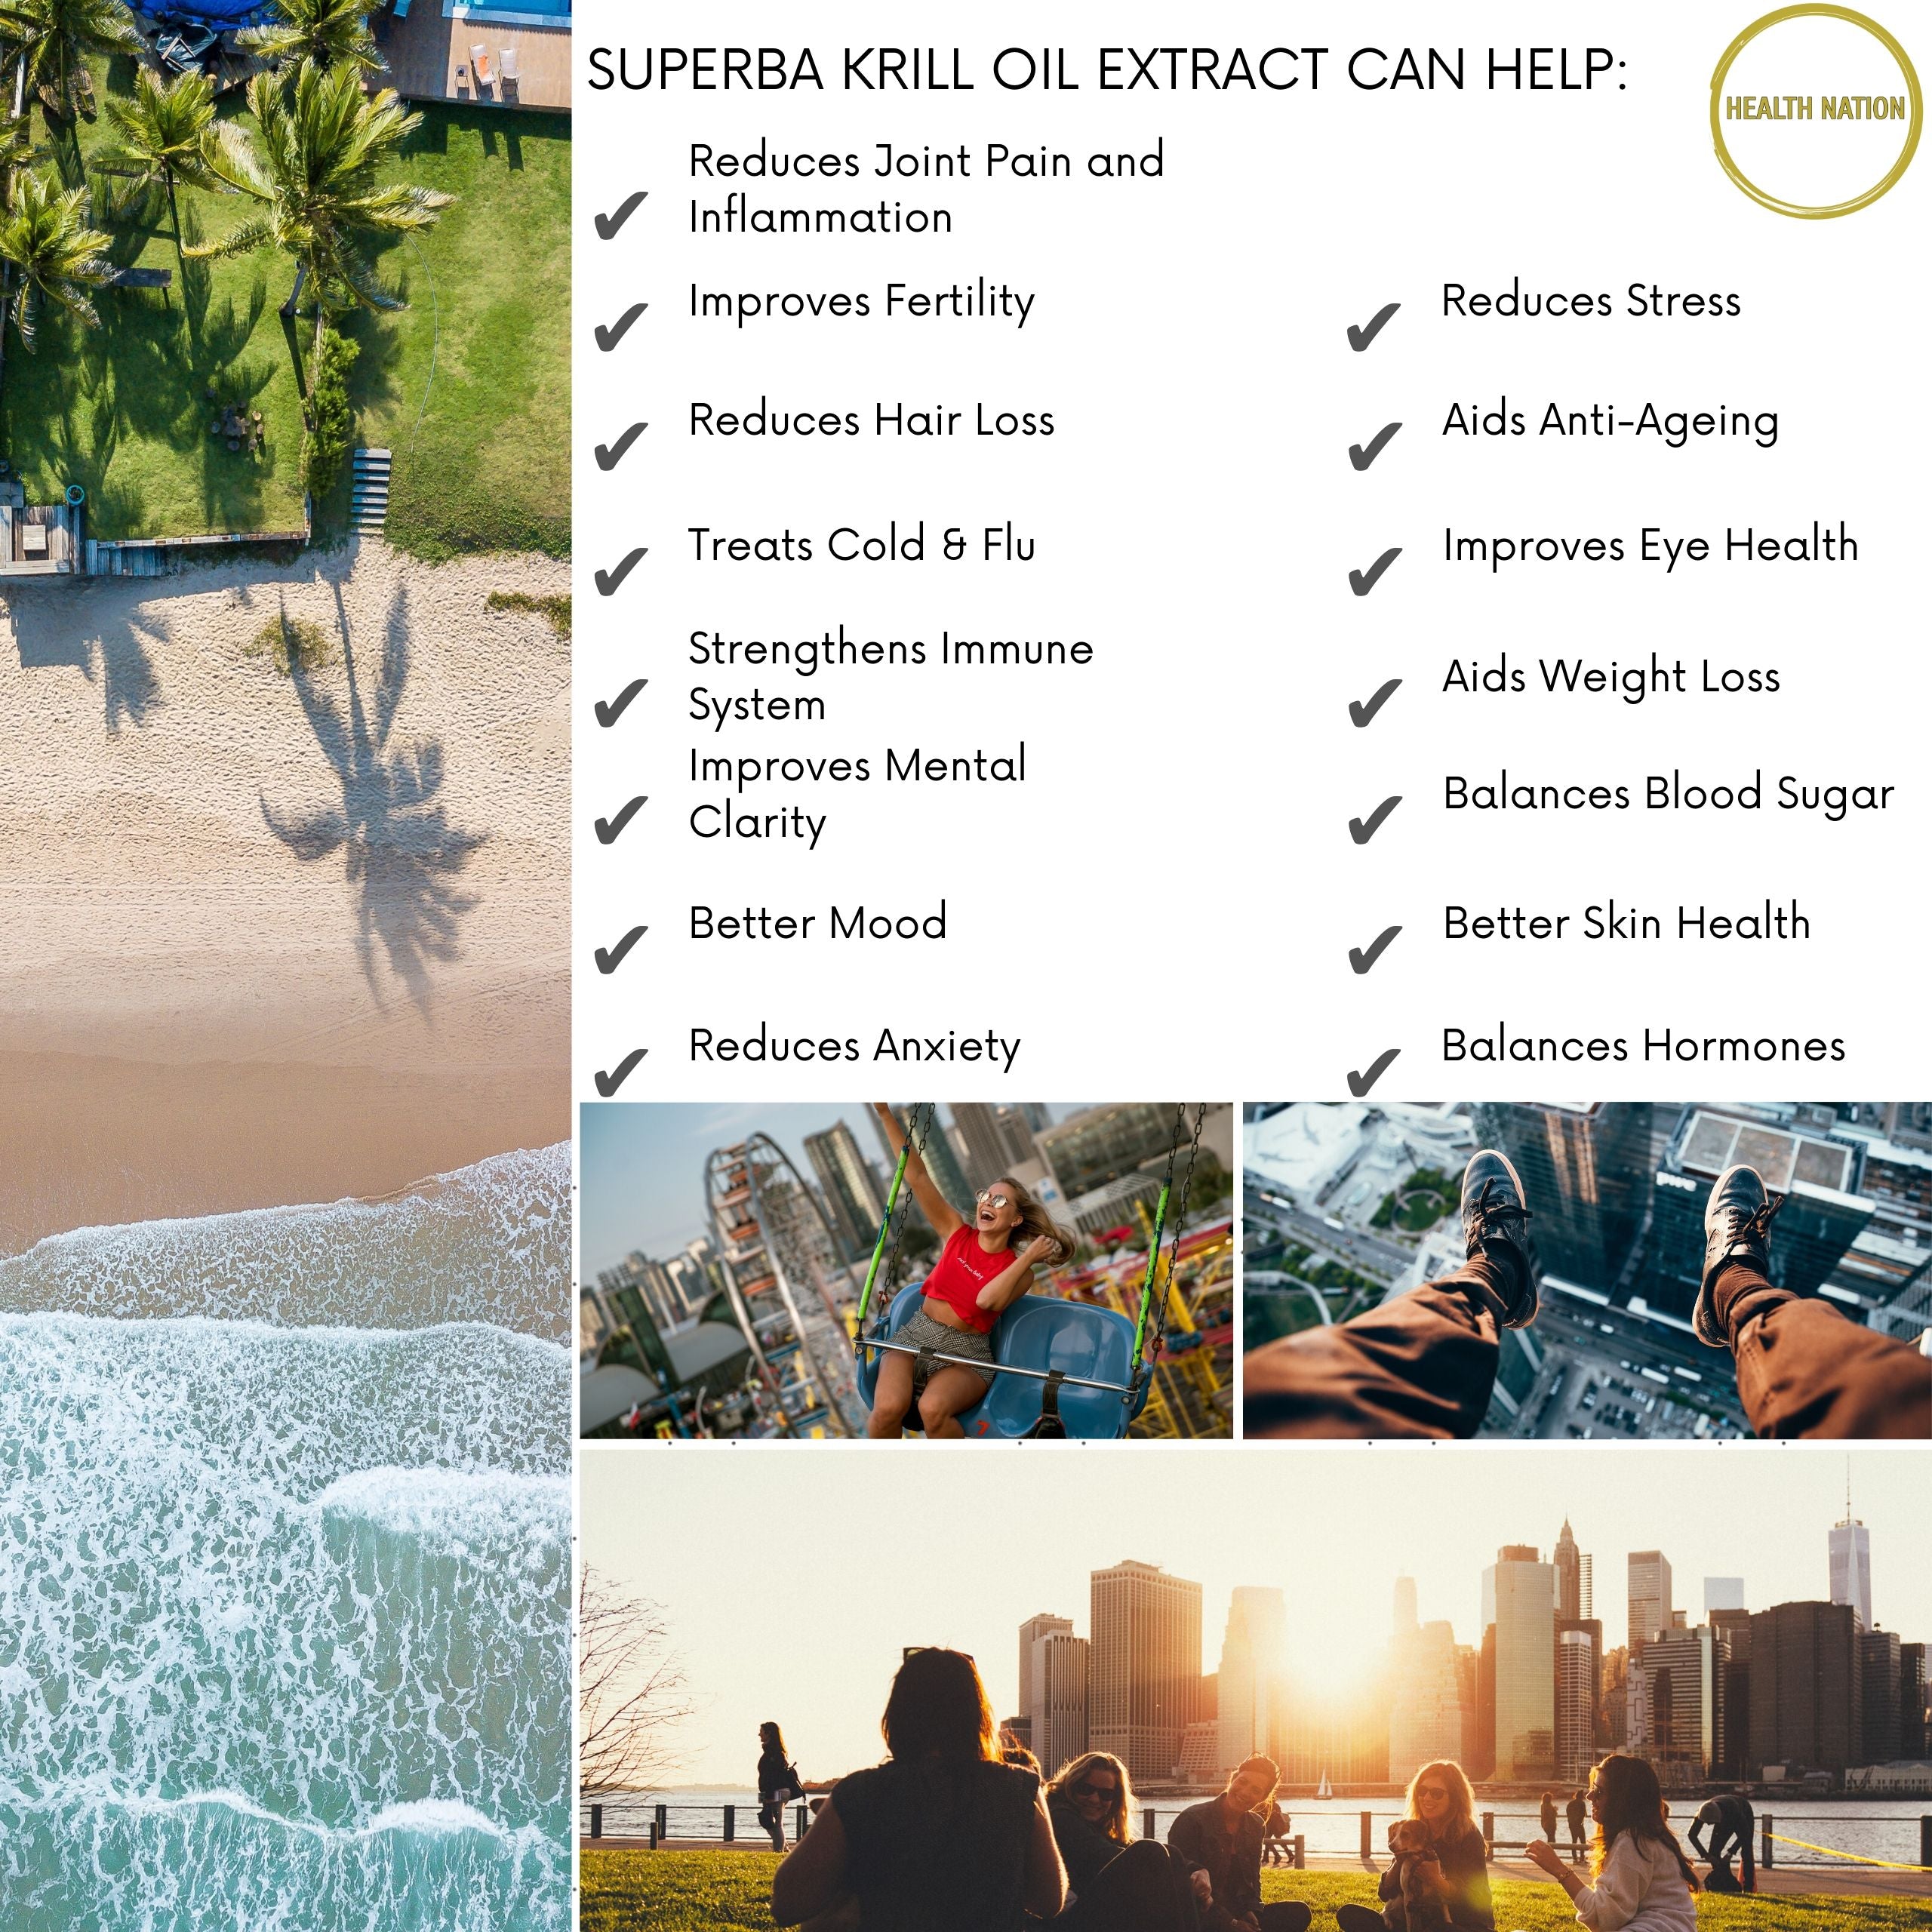 Superba Krill Oil Extract | Helps with Anxiety, Mood, Fertility, Cold/Flu, Hair Loss, Joint Pain, Eye Health, Weight Loss, Anti-Ageing, Balances Blood Sugar, Vibrant Skin, Stress and Mental Clarity | Made in UK | 500mg 60 Capsules - Health Nation